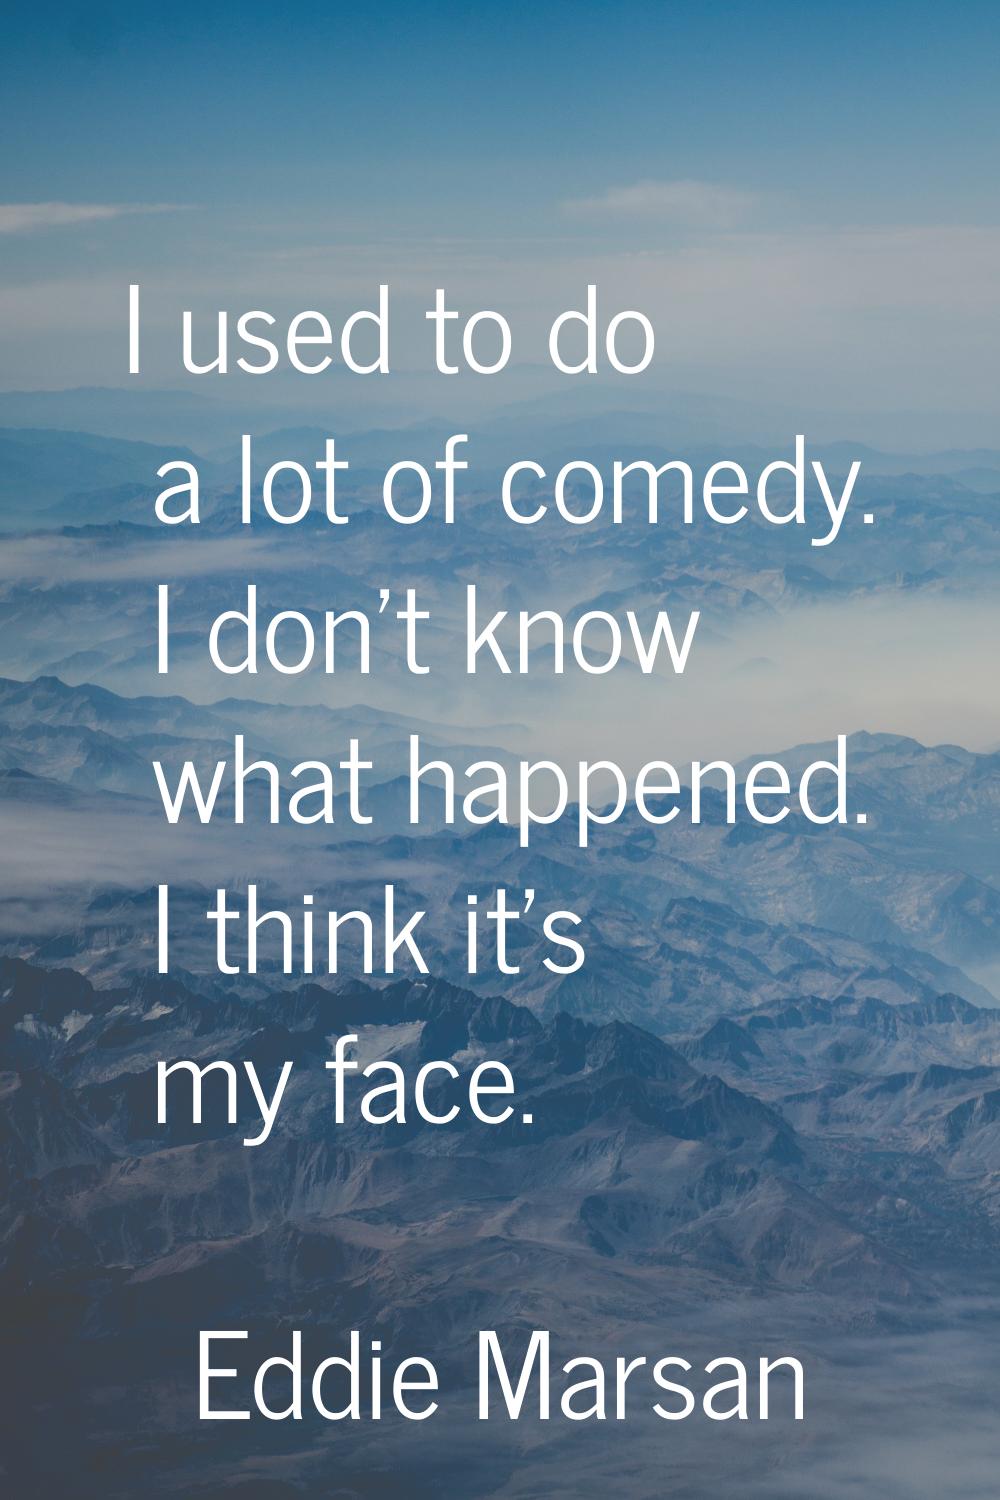 I used to do a lot of comedy. I don't know what happened. I think it's my face.